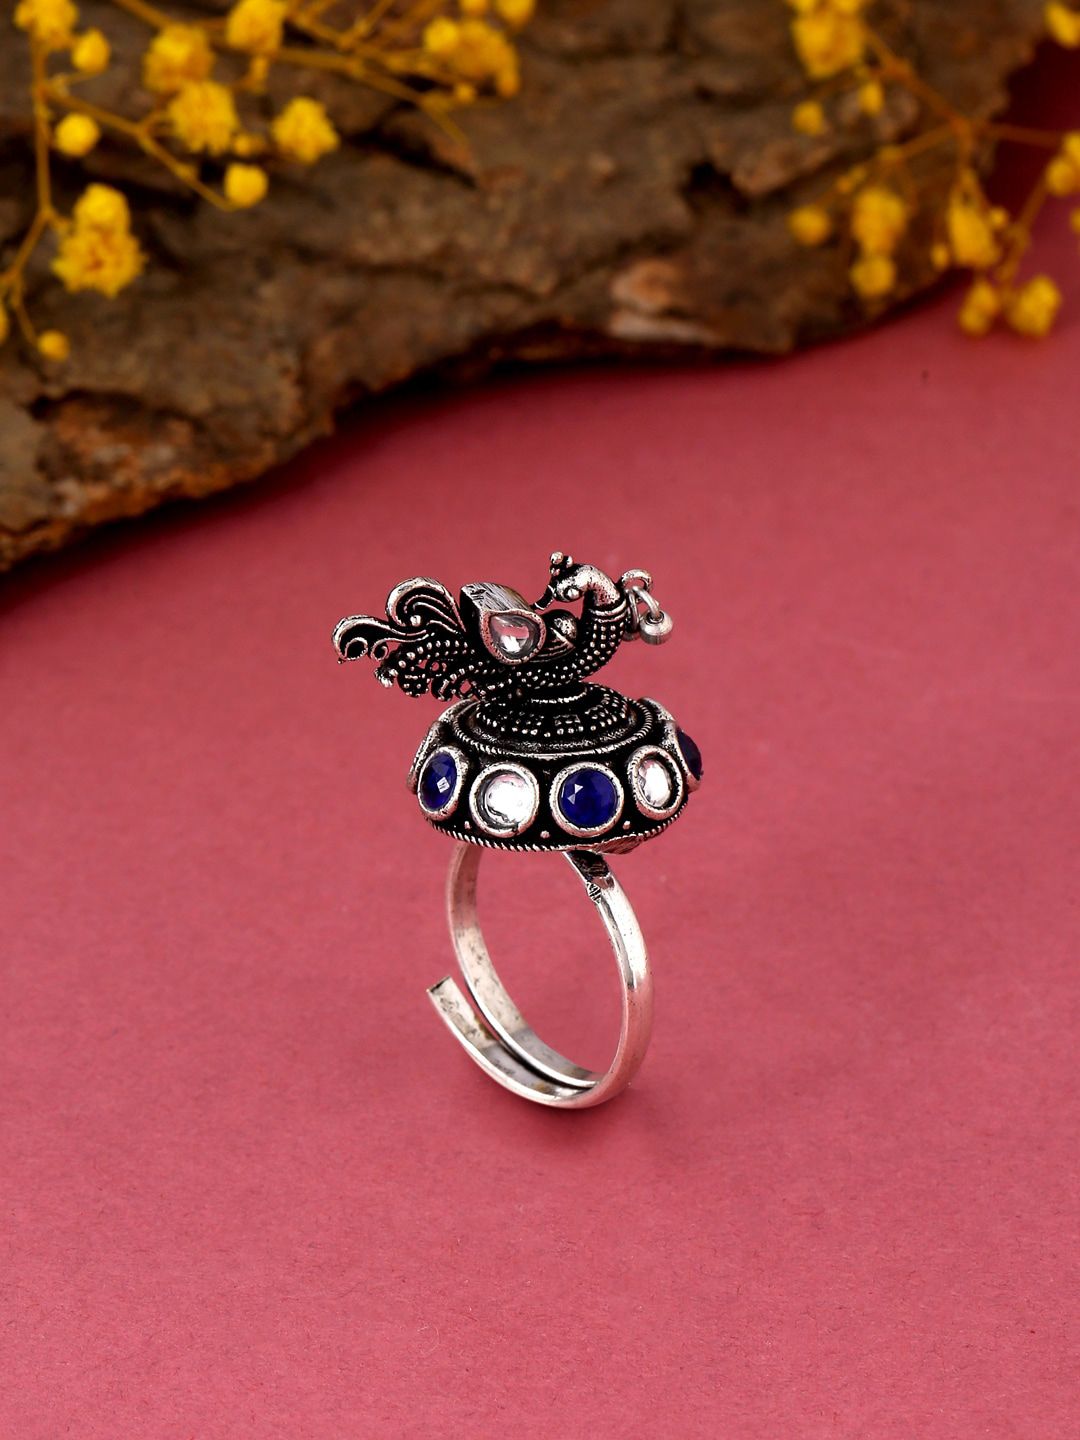 kashwini Silver-Plated Black Stone-Studded Peacock Design  Adjustable Finger Ring Price in India